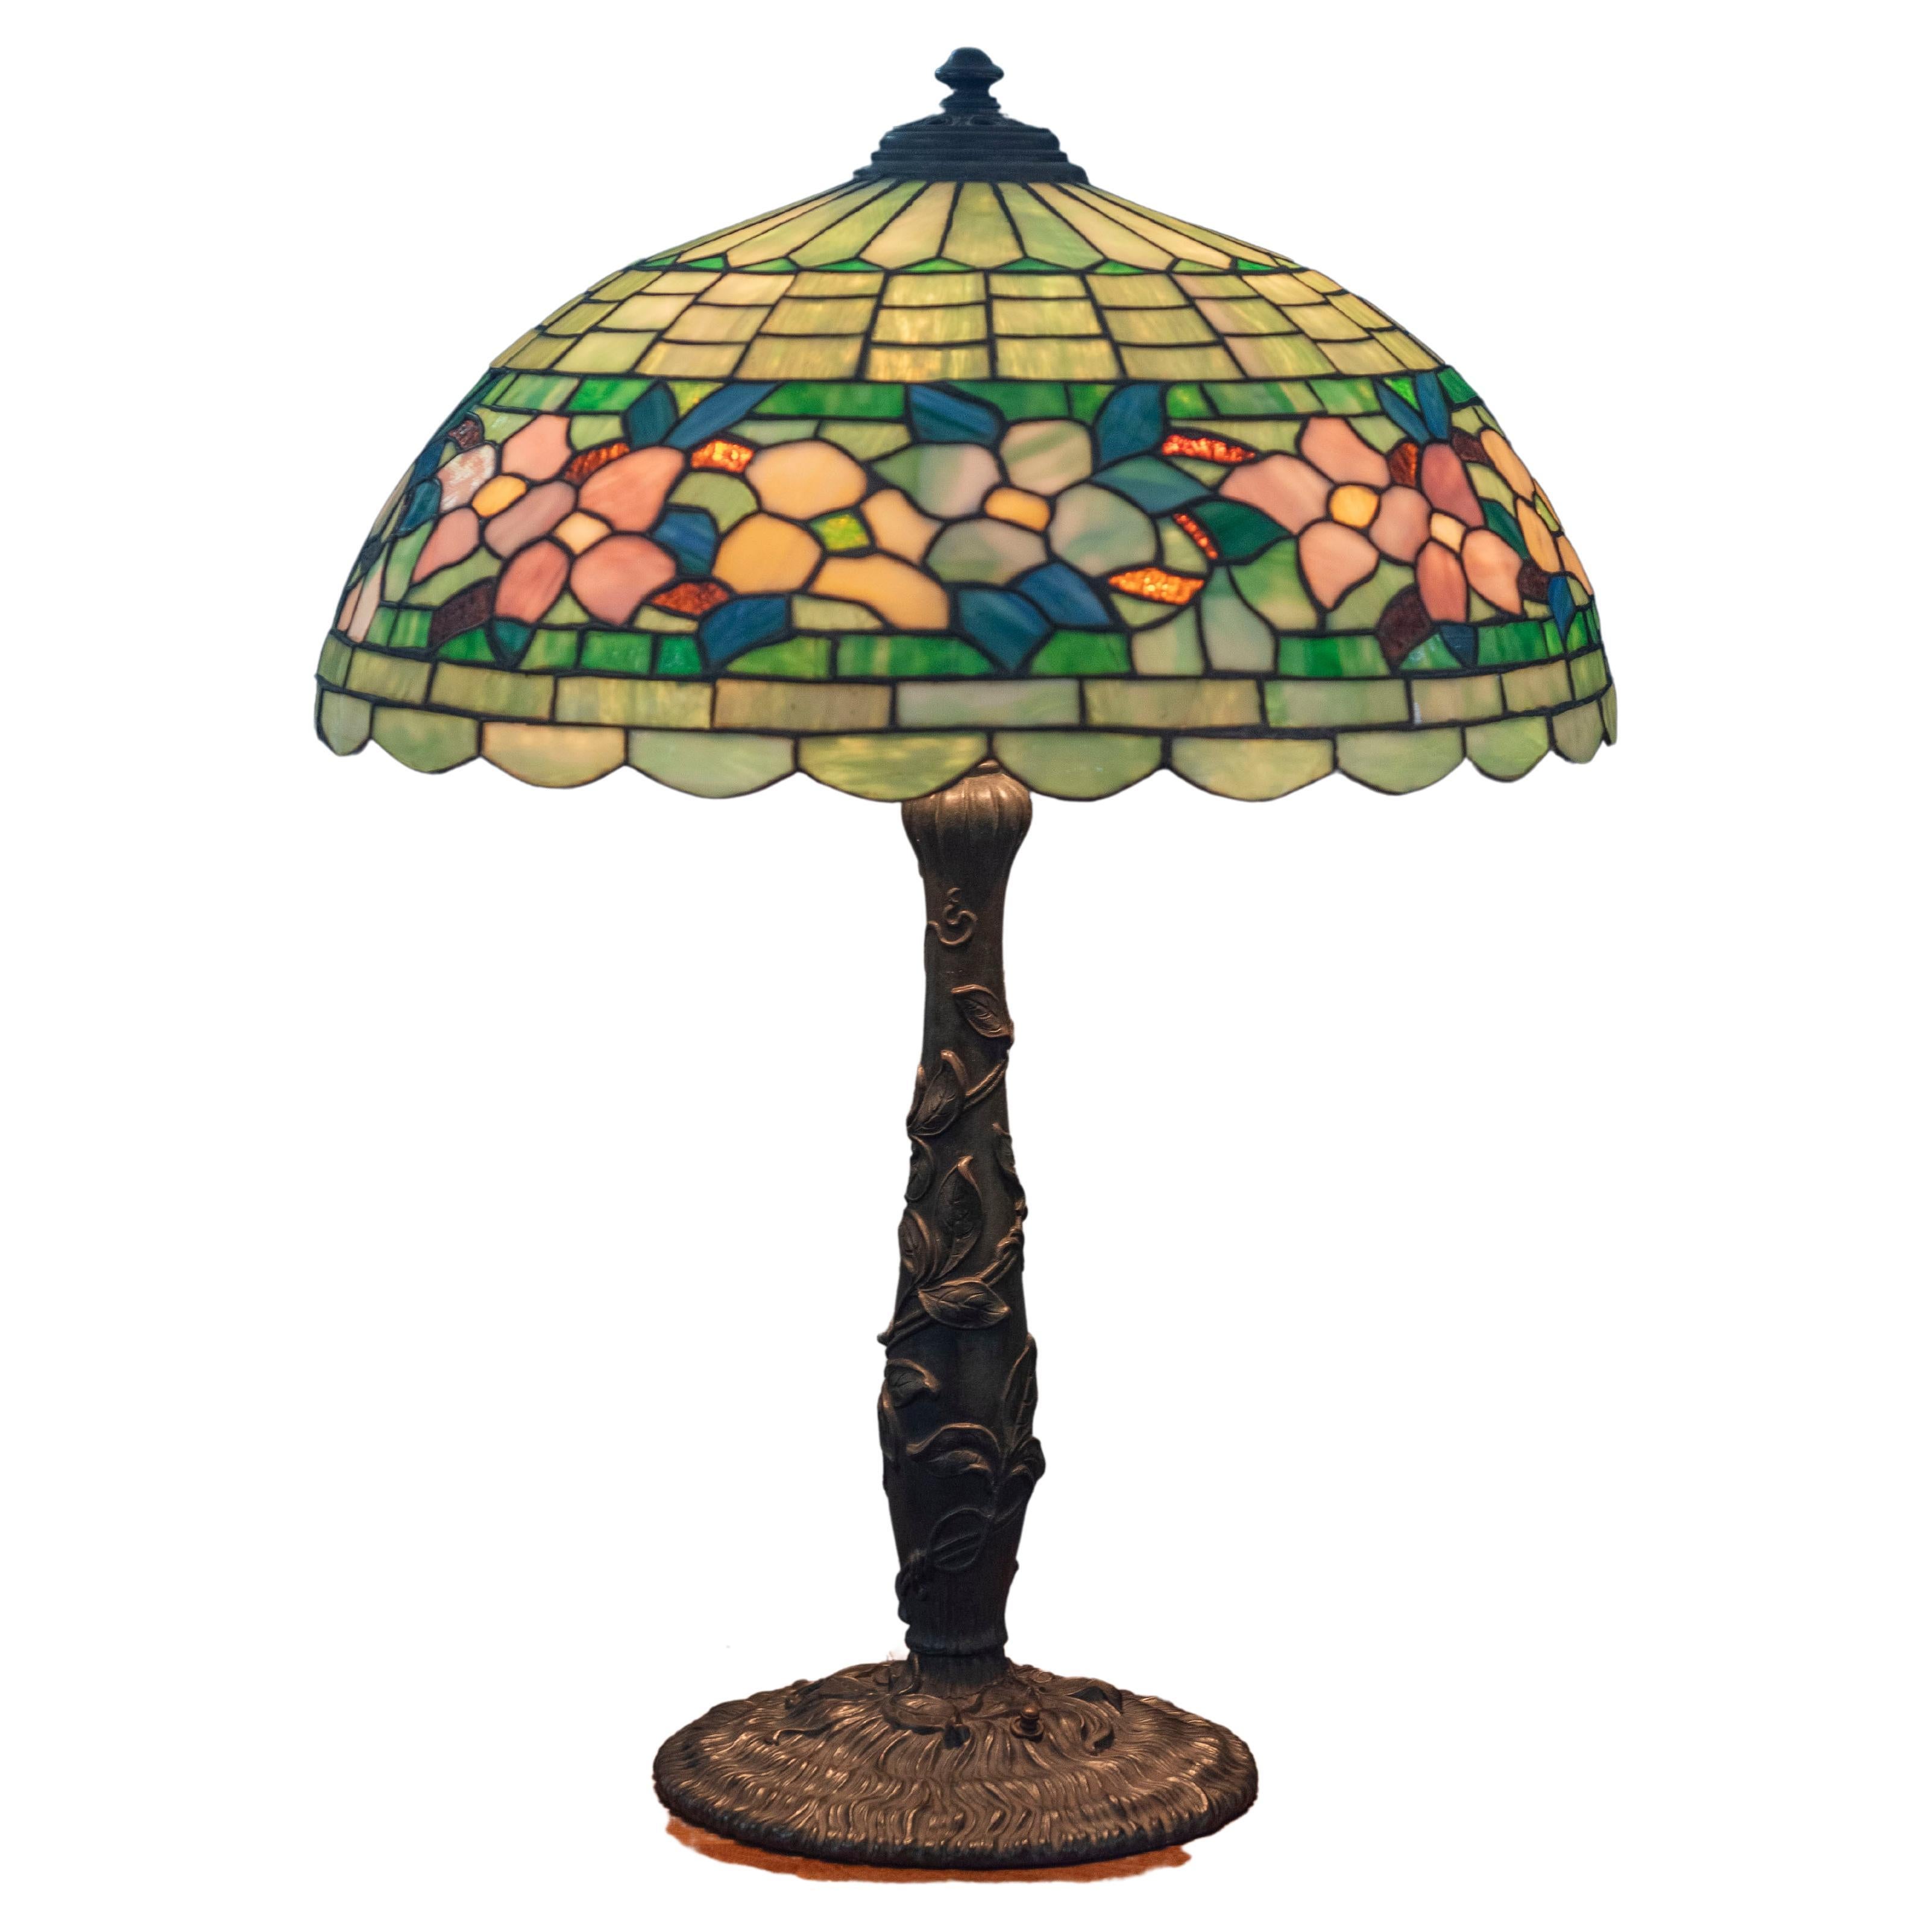 Large Antique Leaded Glass Table Lamp by Wilkinson Co. B'klyn N.Y ca. 1910 For Sale